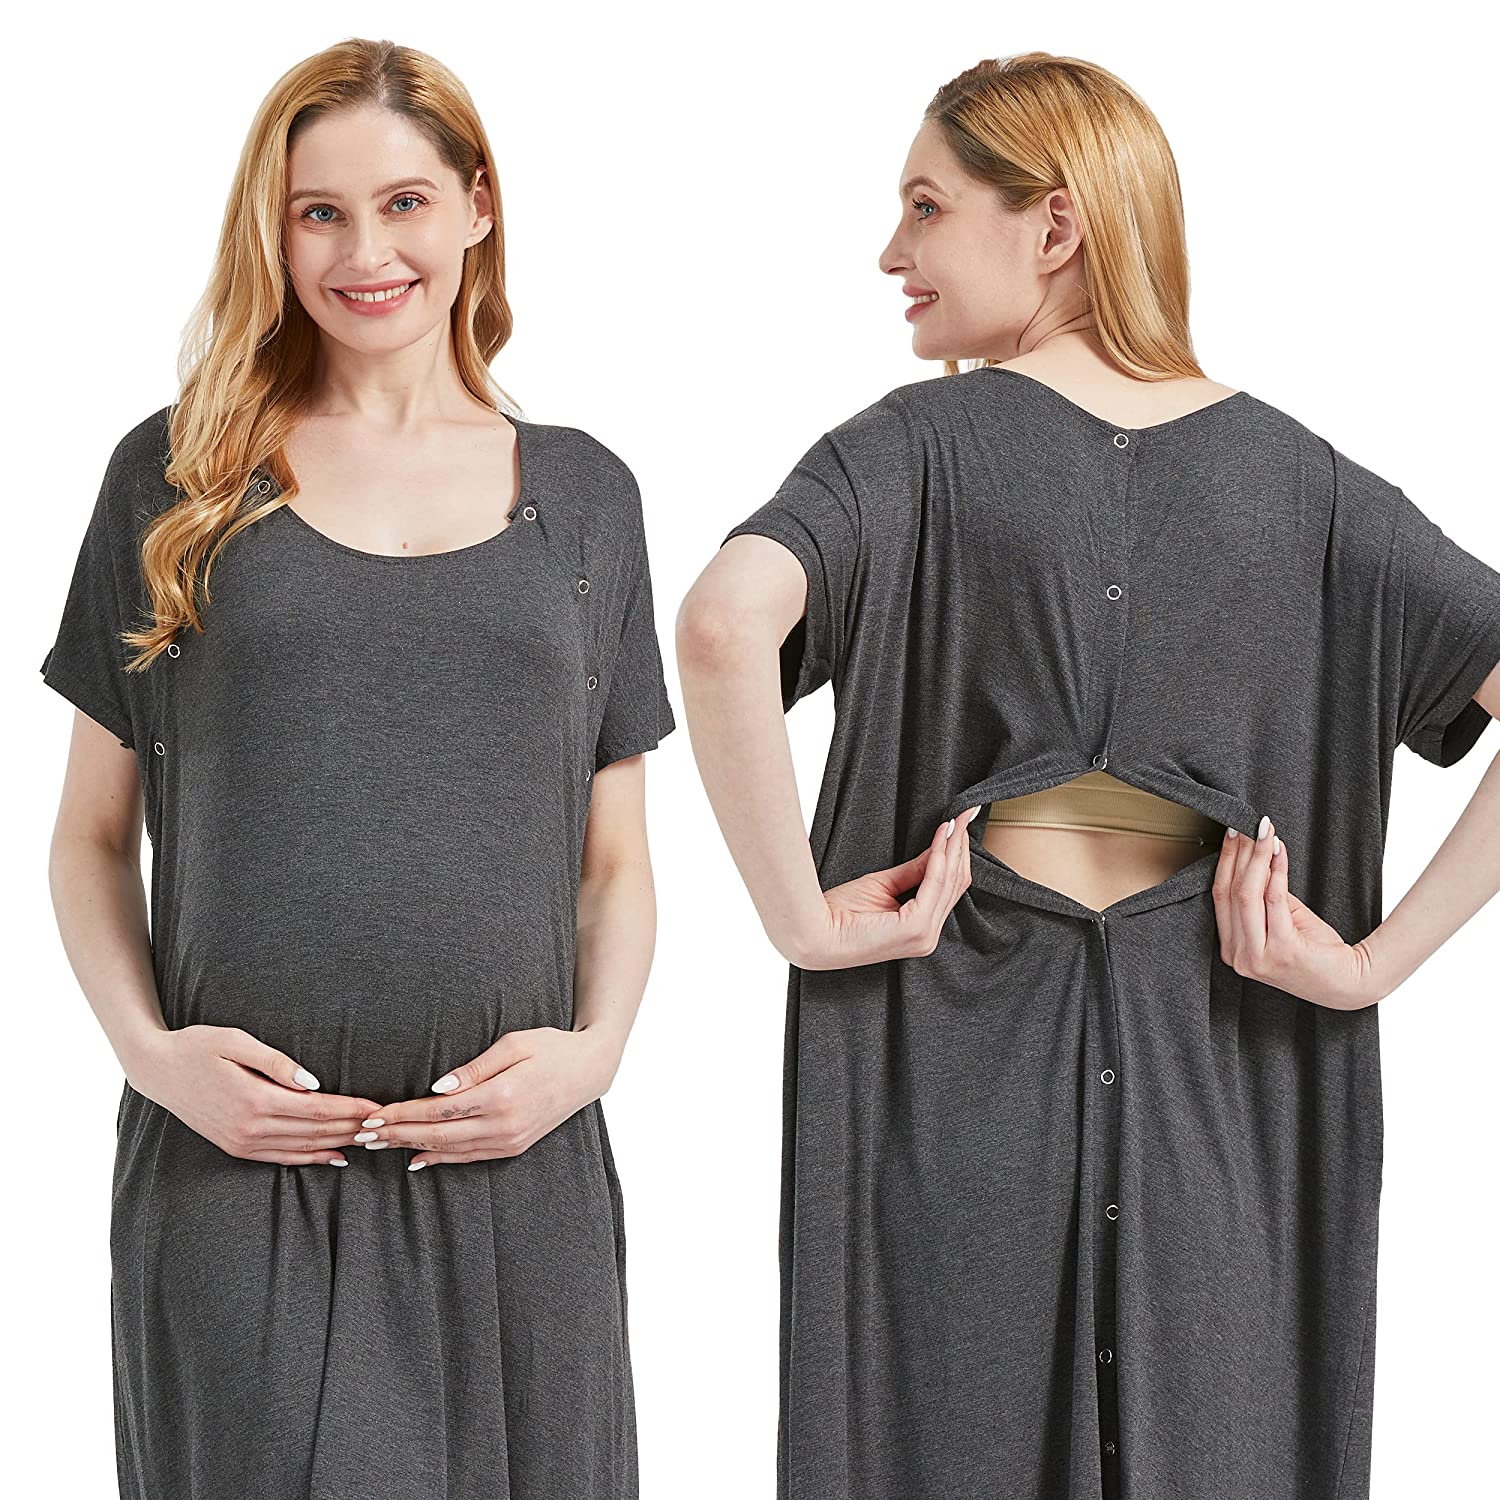 3 in 1 Delivery/Labor/Nursing Nightgown Women's Maternity Hospital